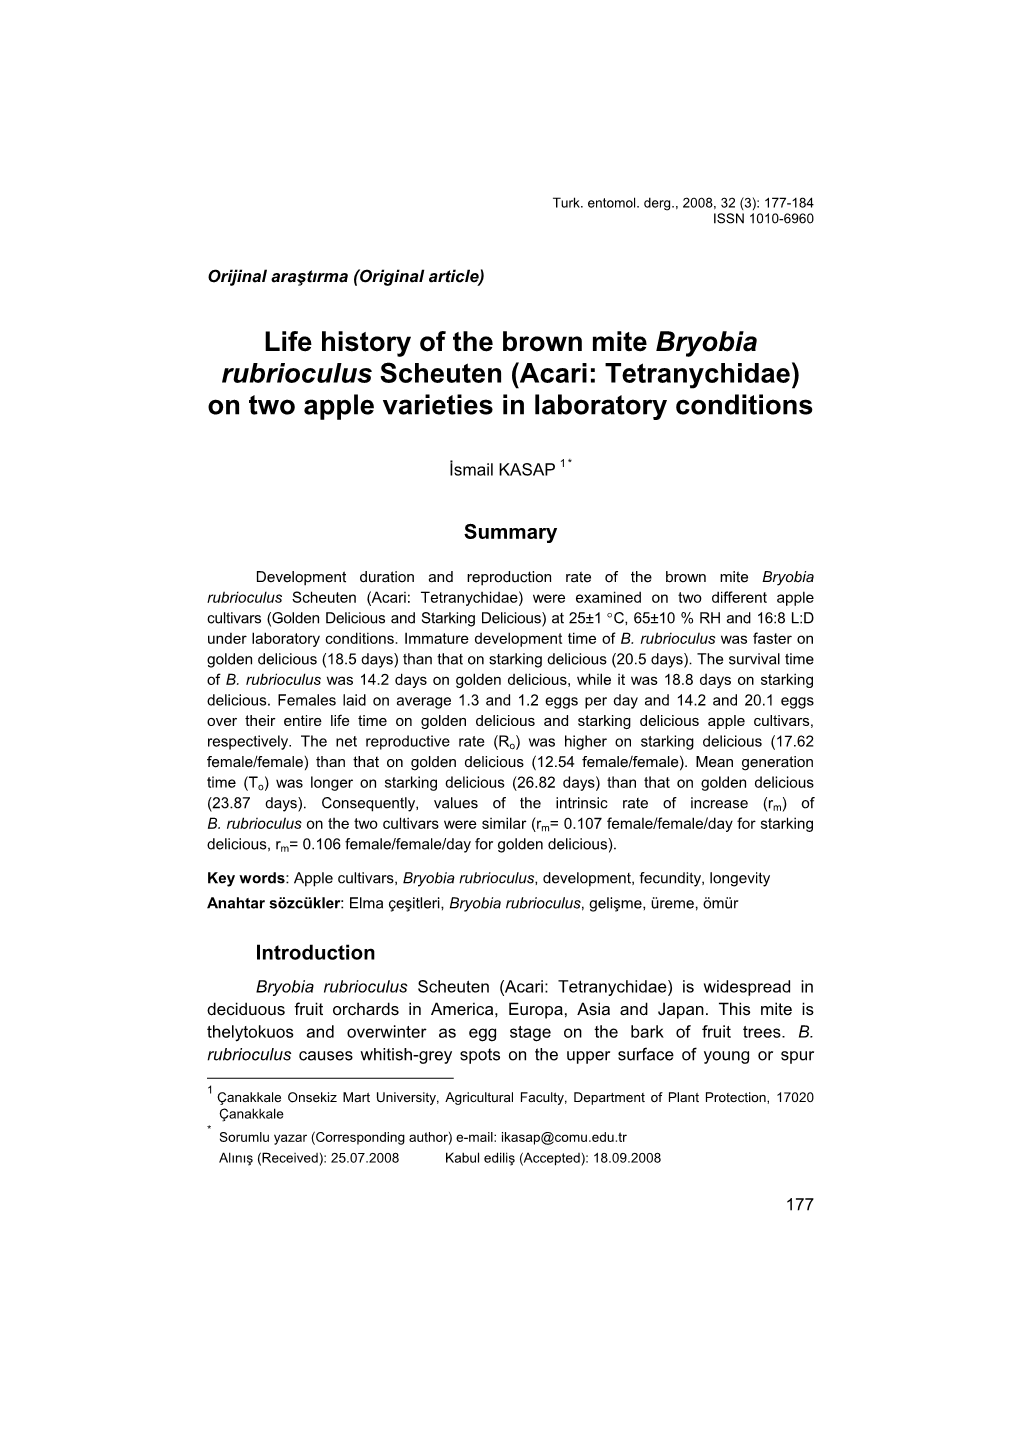 Life History of the Brown Mite Bryobia Rubrioculus Scheuten (Acari: Tetranychidae) on Two Apple Varieties in Laboratory Conditions